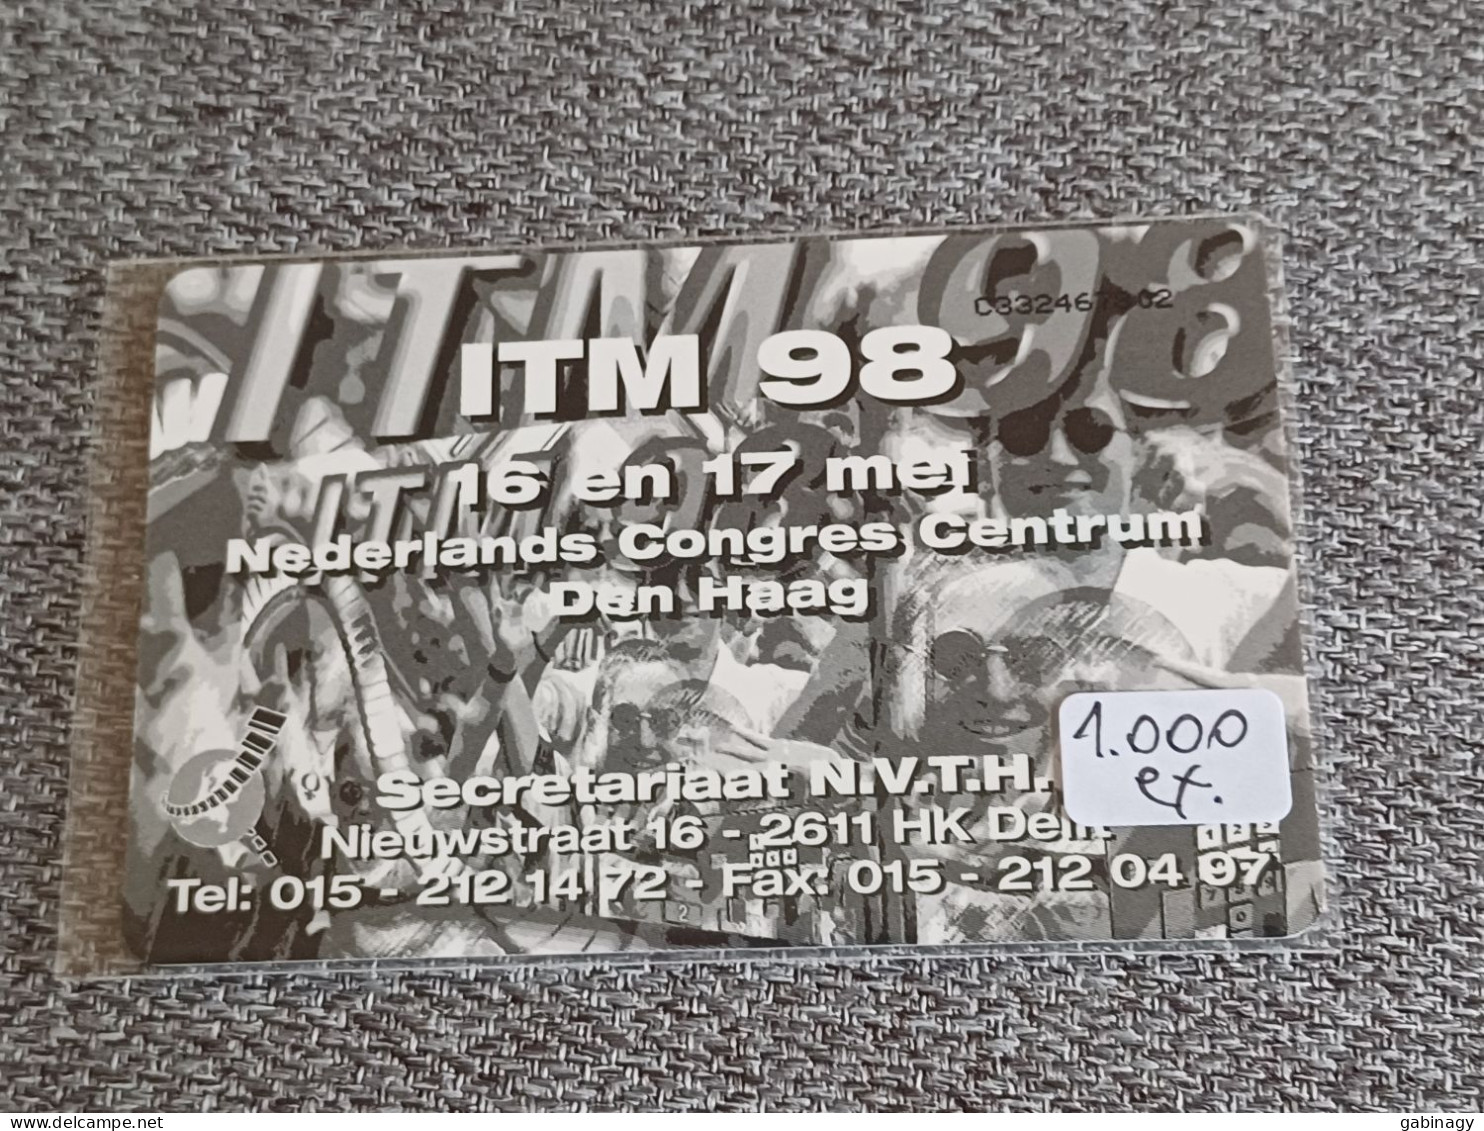 NETHERLANDS - CRD605 - ITM 98 - 1.000 EX. - Private